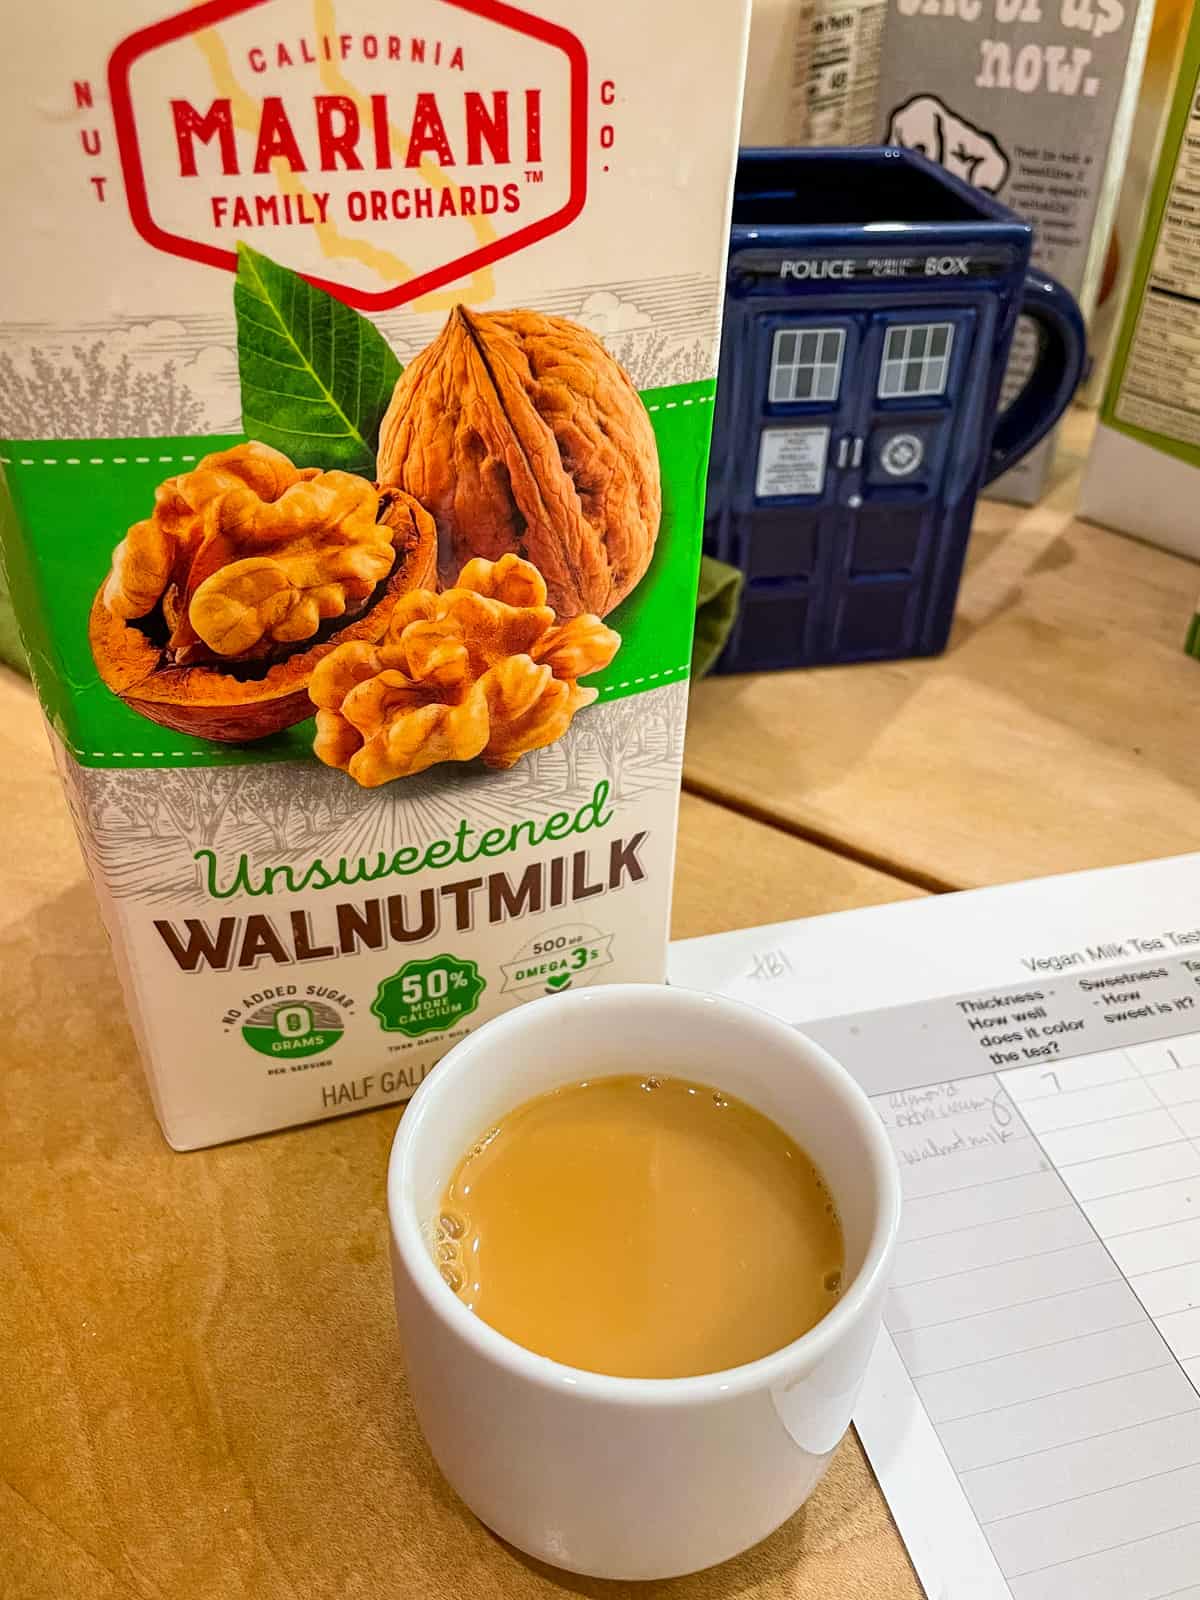 carton of mariani walnutmilk with cup of black yorkshire tea with milk in it